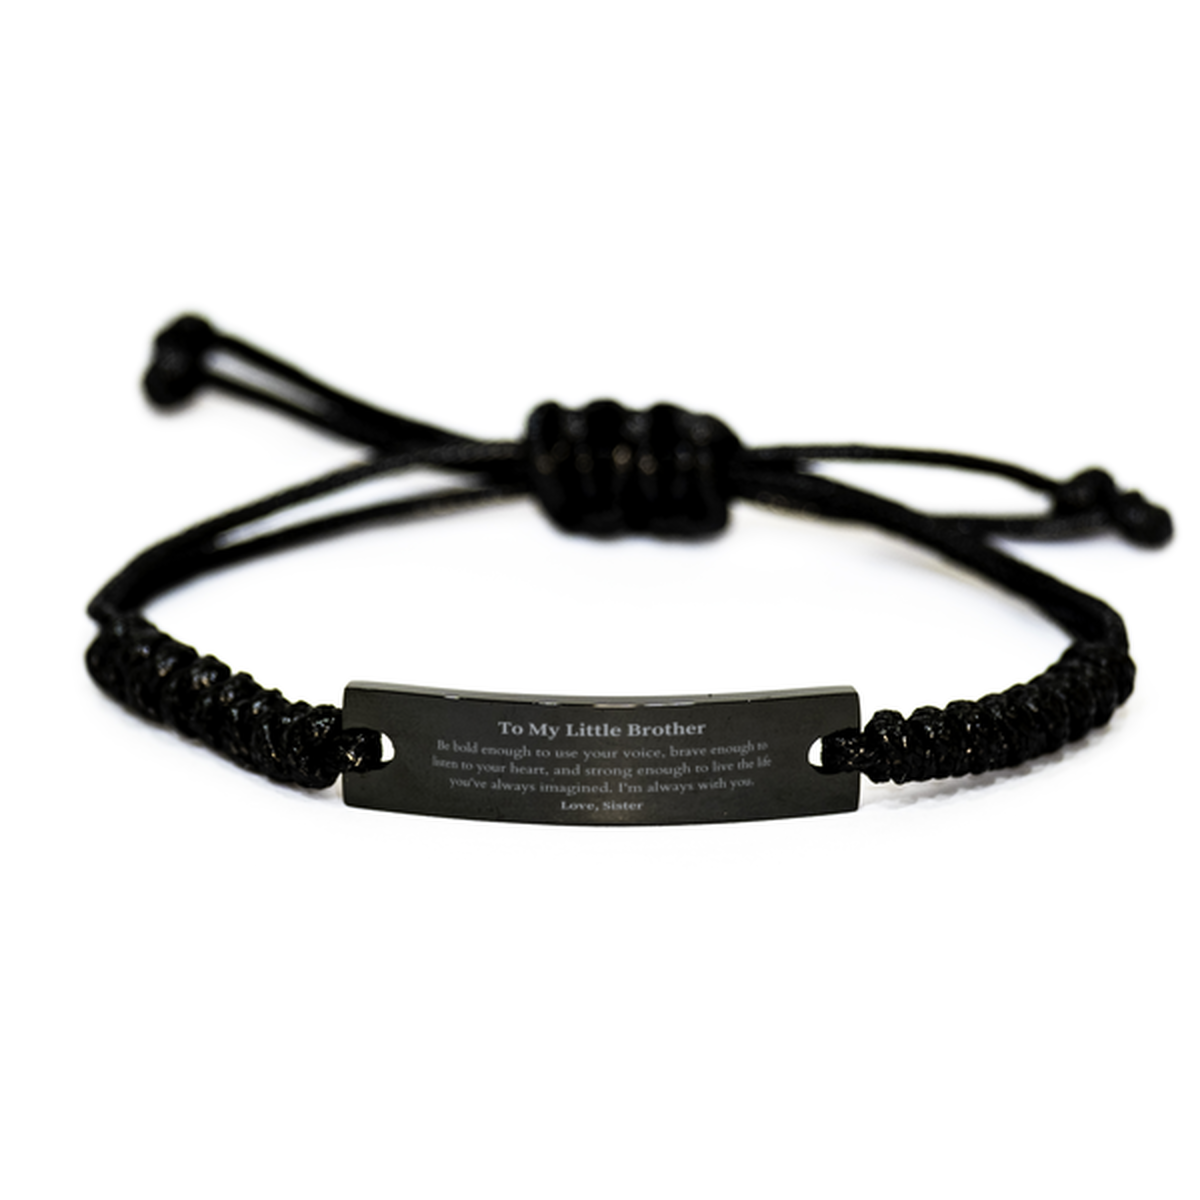 Keepsake Little Brother Black Rope Bracelet Gift Idea Graduation Christmas Birthday Little Brother from Sister, Little Brother Be bold enough to use your voice, brave enough to listen to your heart. Love, Sister